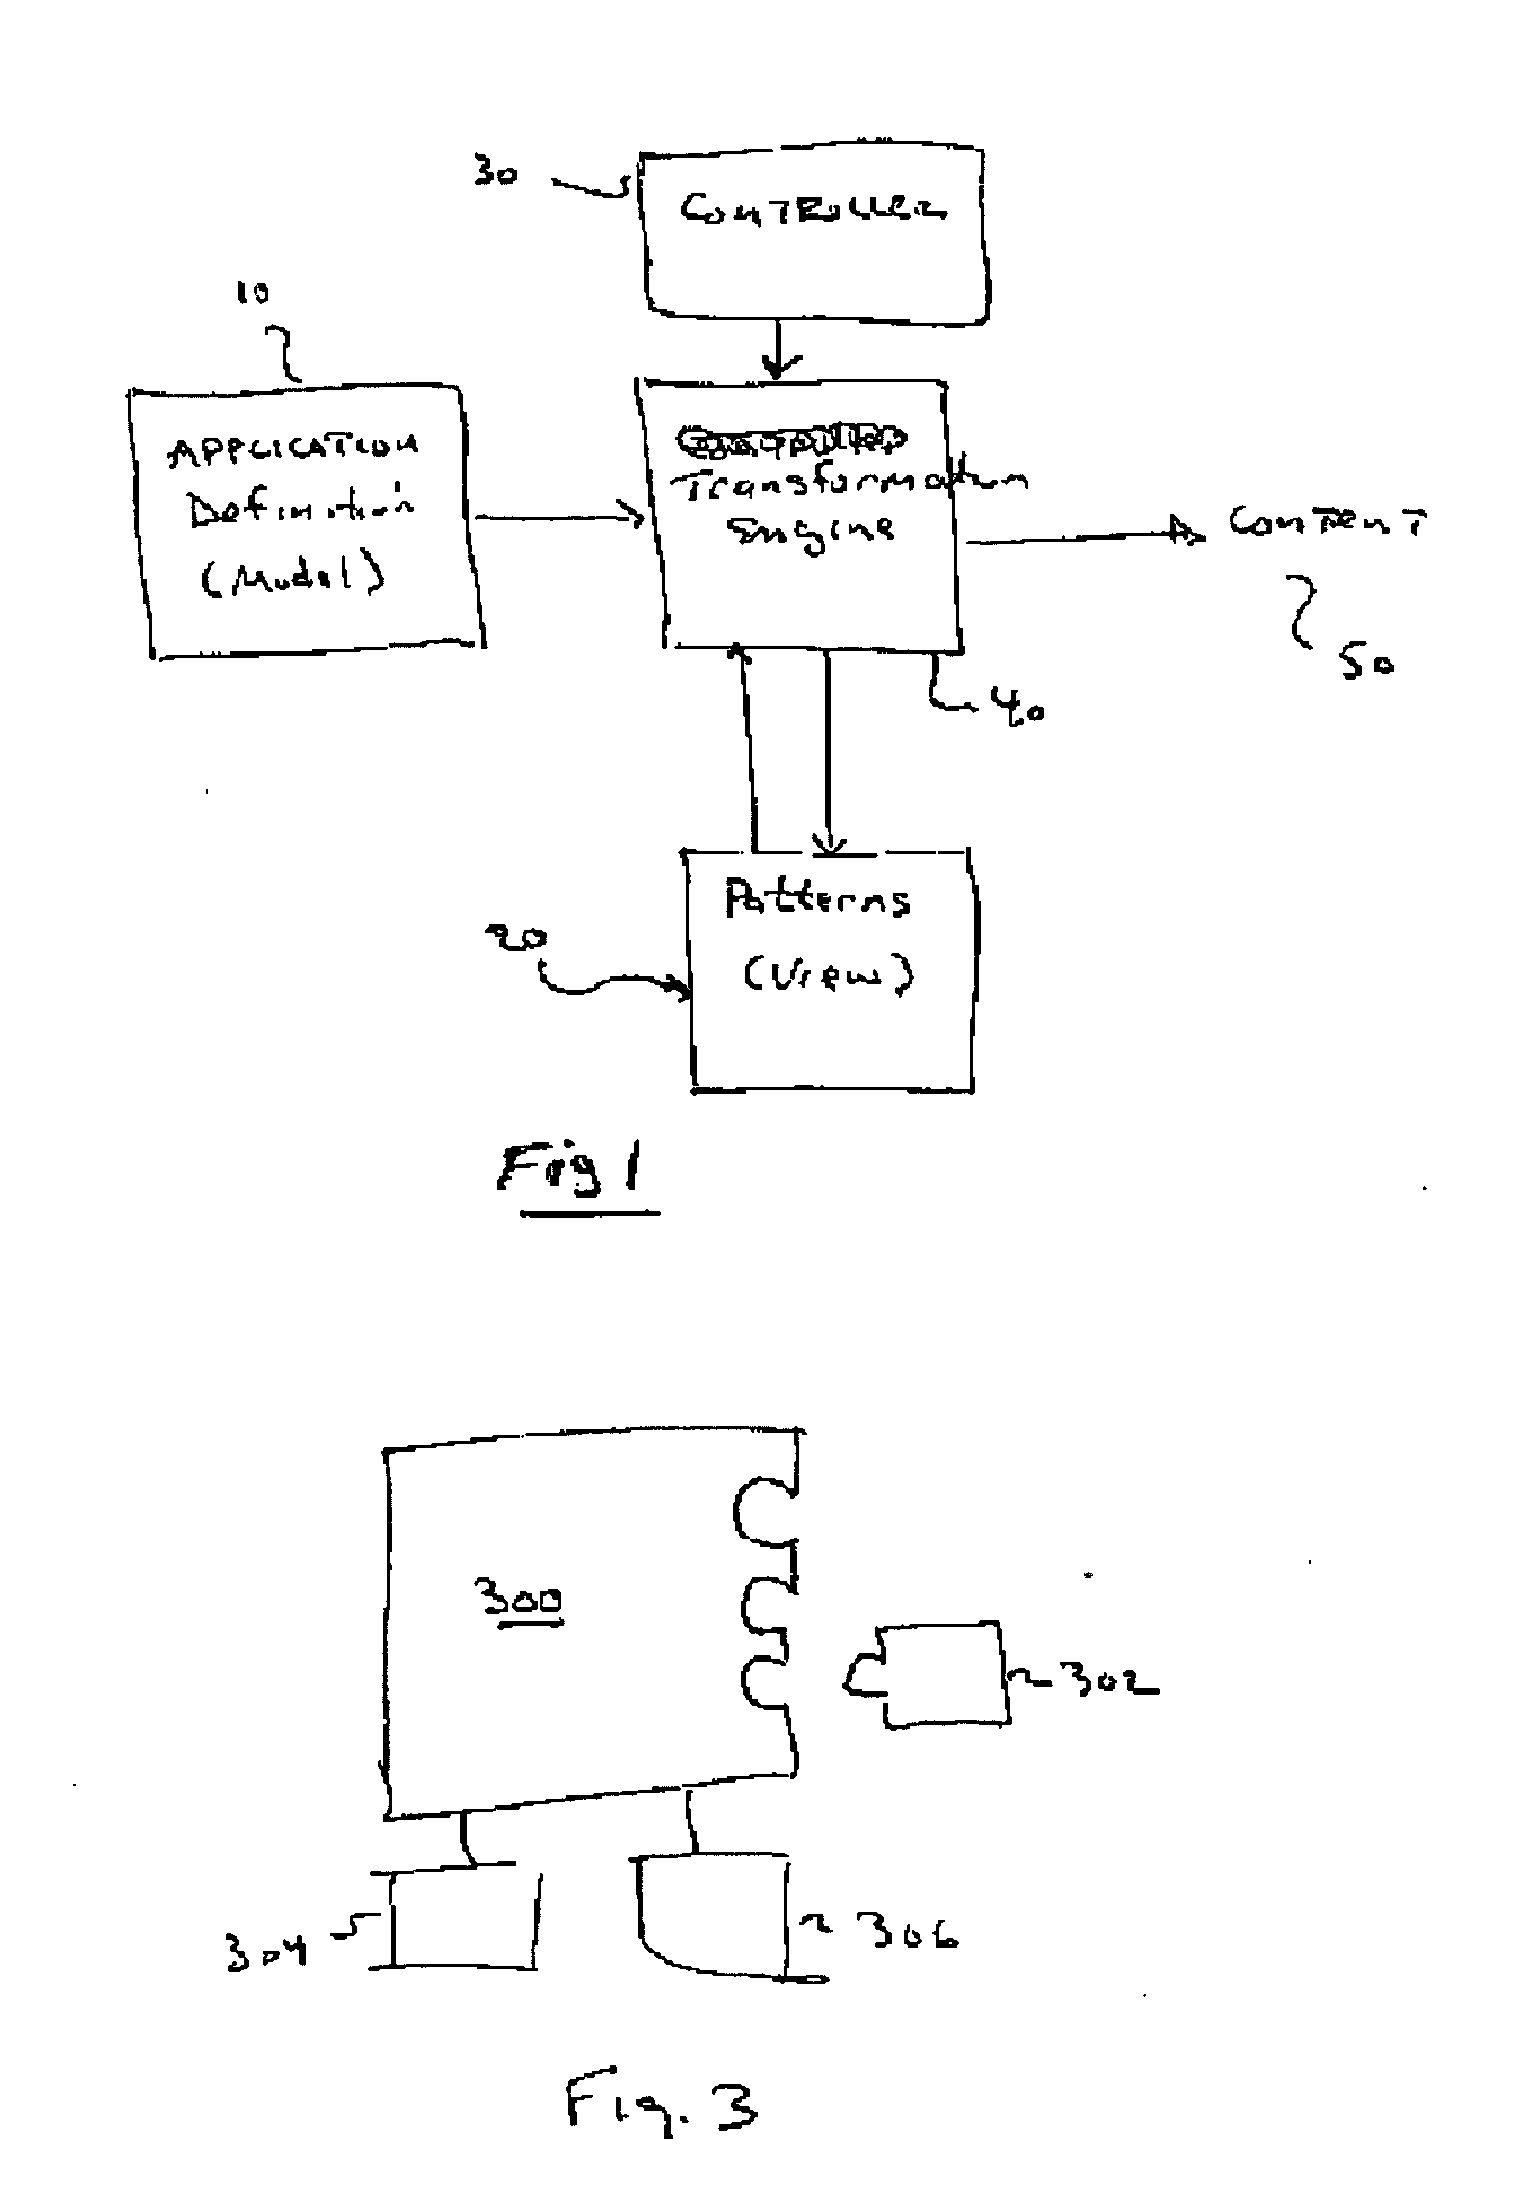 System and Method for Creating Application Content using an Open Model Driven Architecture